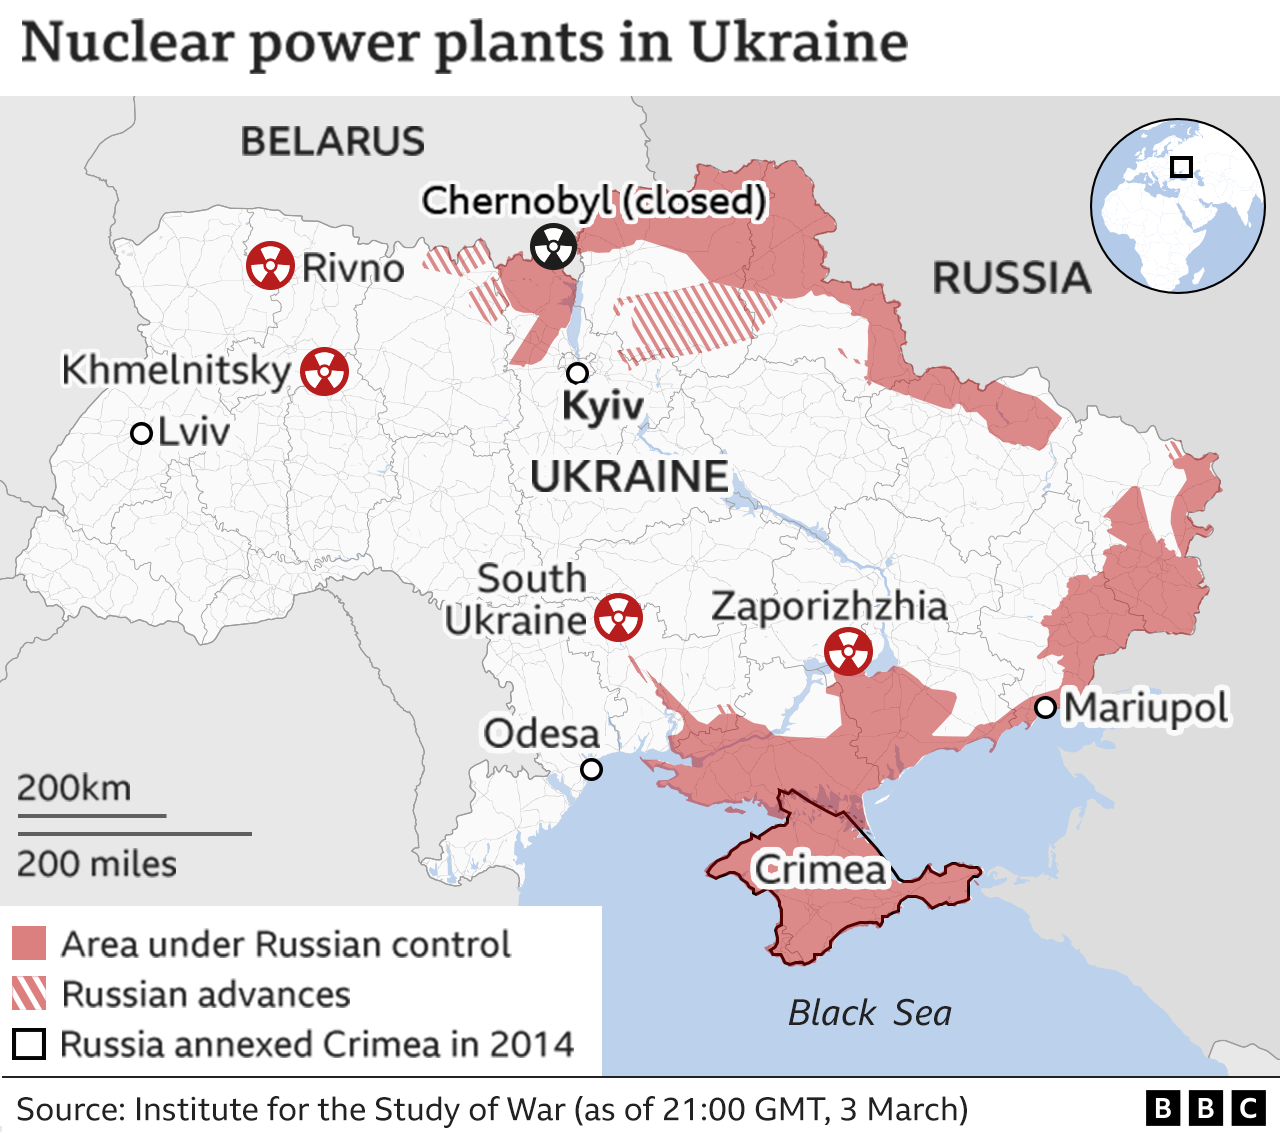 Map showing the location of Ukraine's nuclear power plants and Russian troop advances